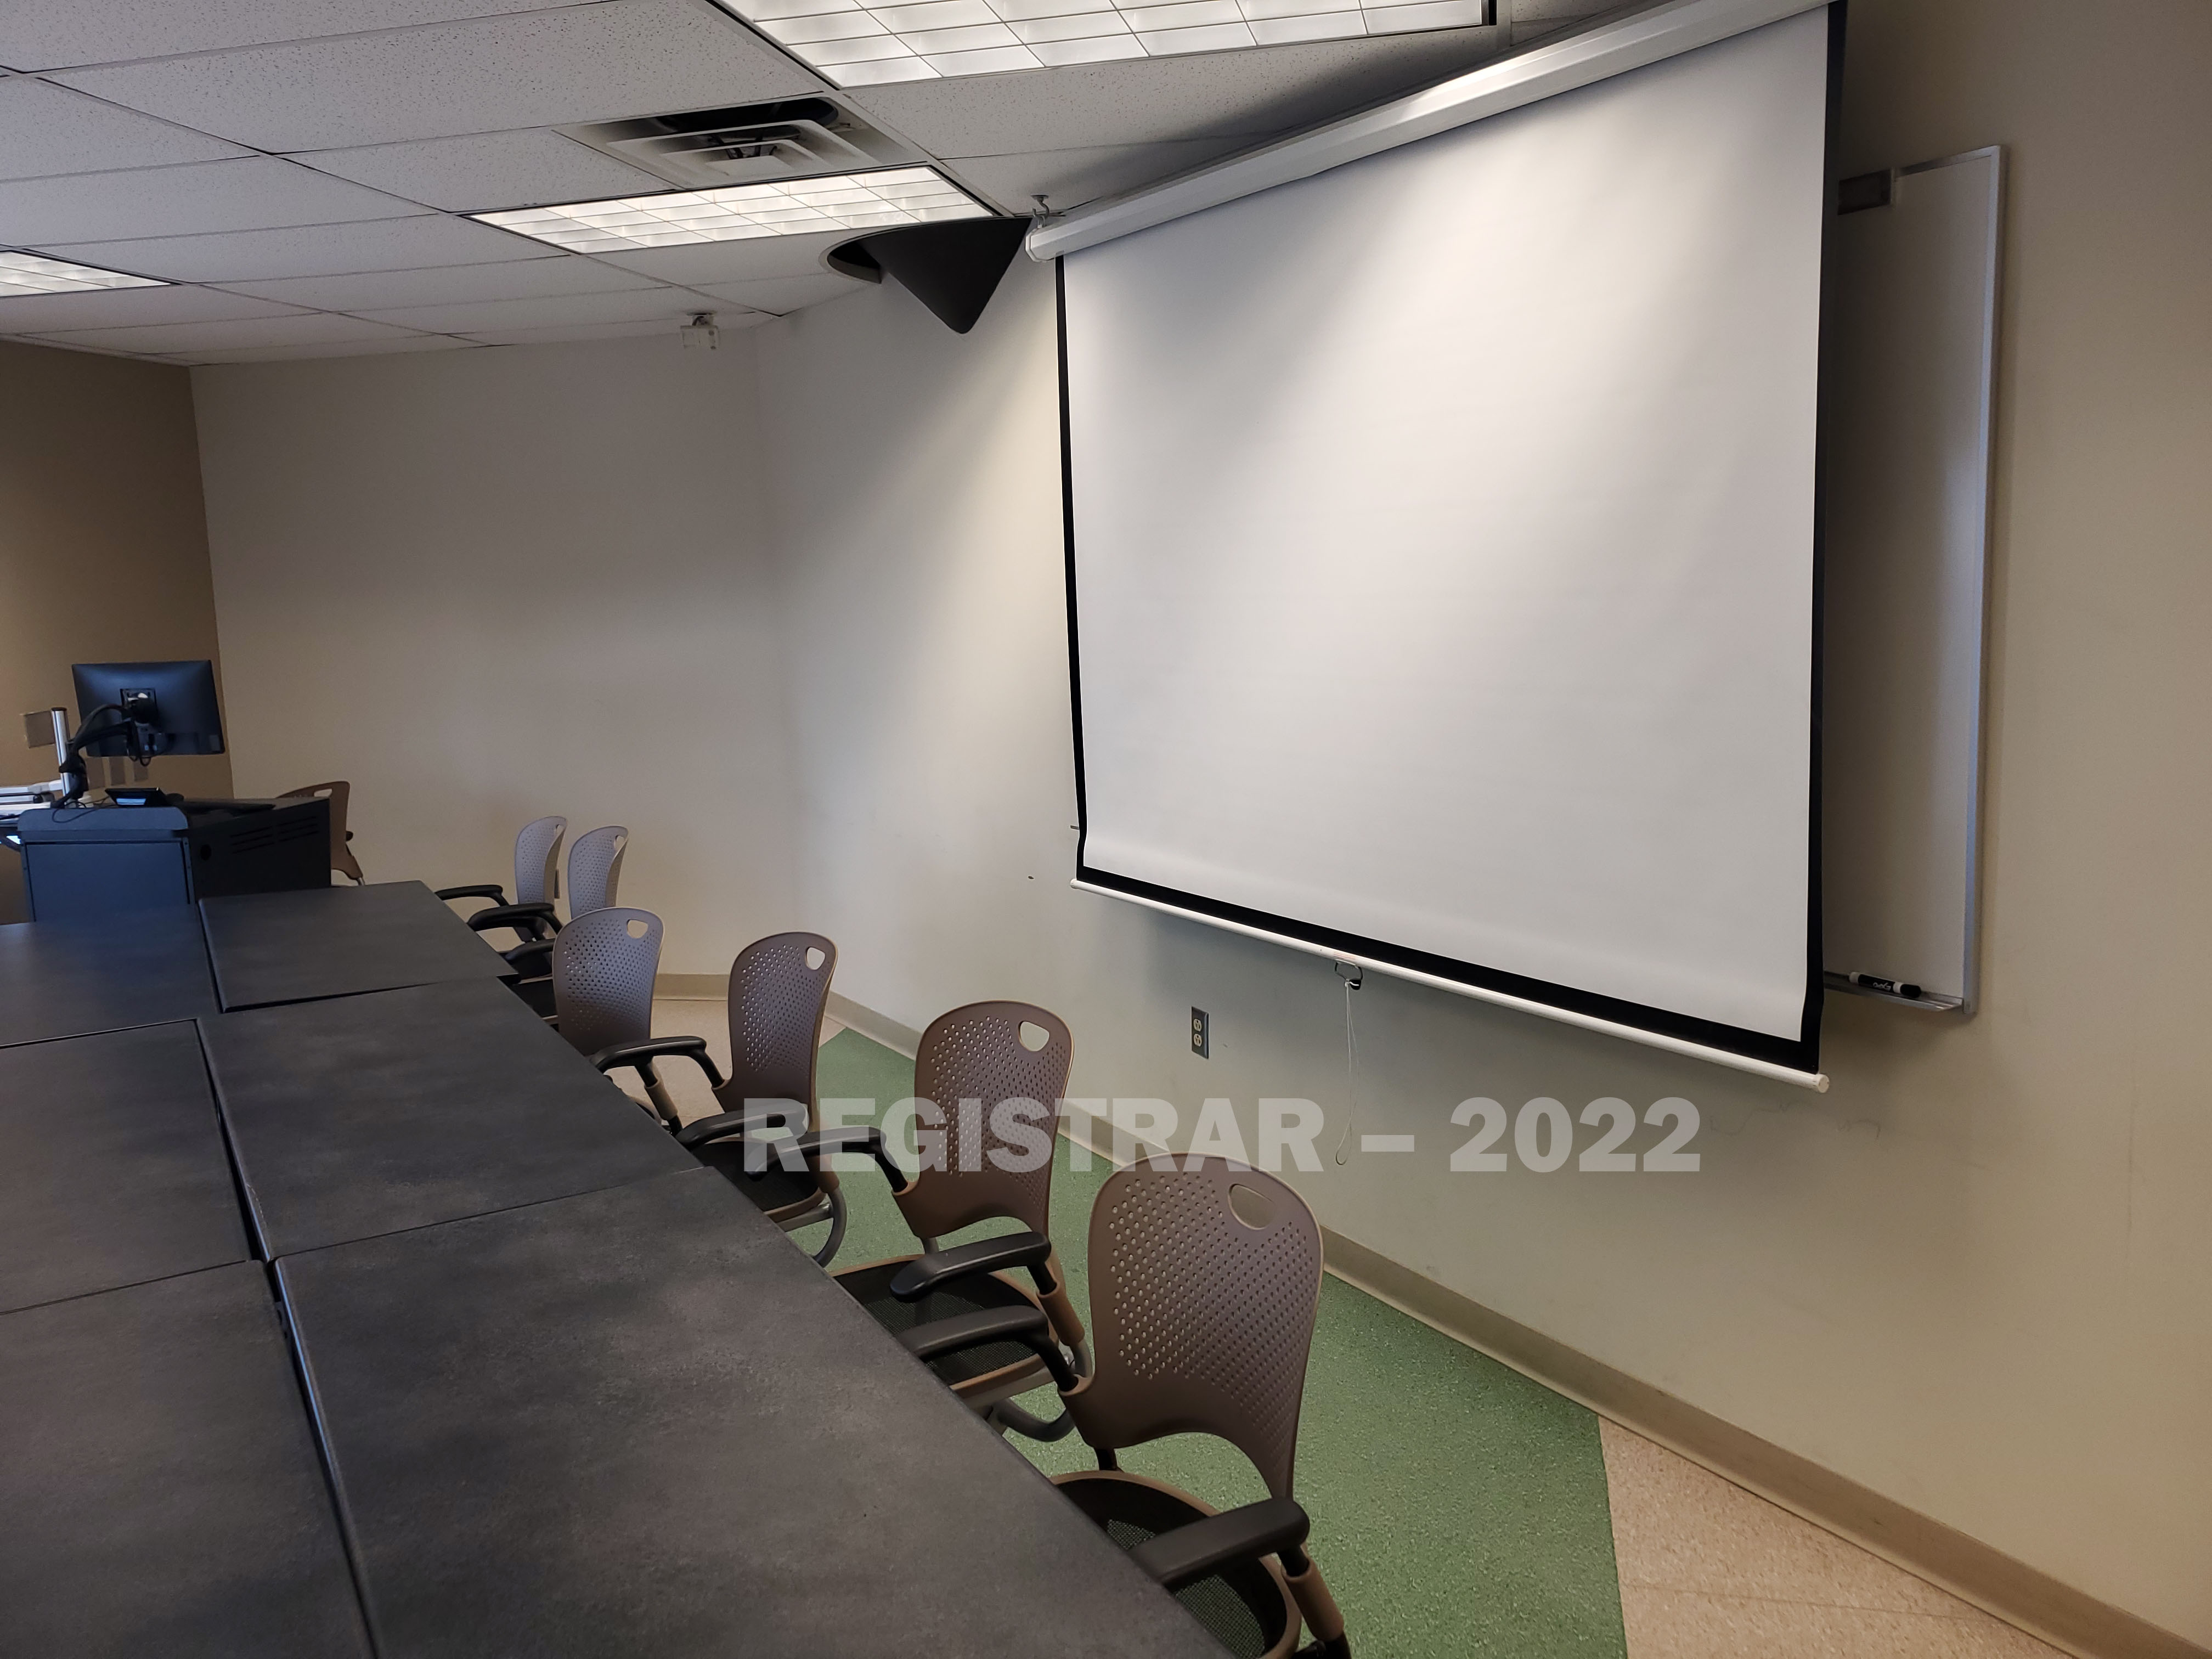 Enarson Classroom Building room 338 view from the back of the room with projector screen down